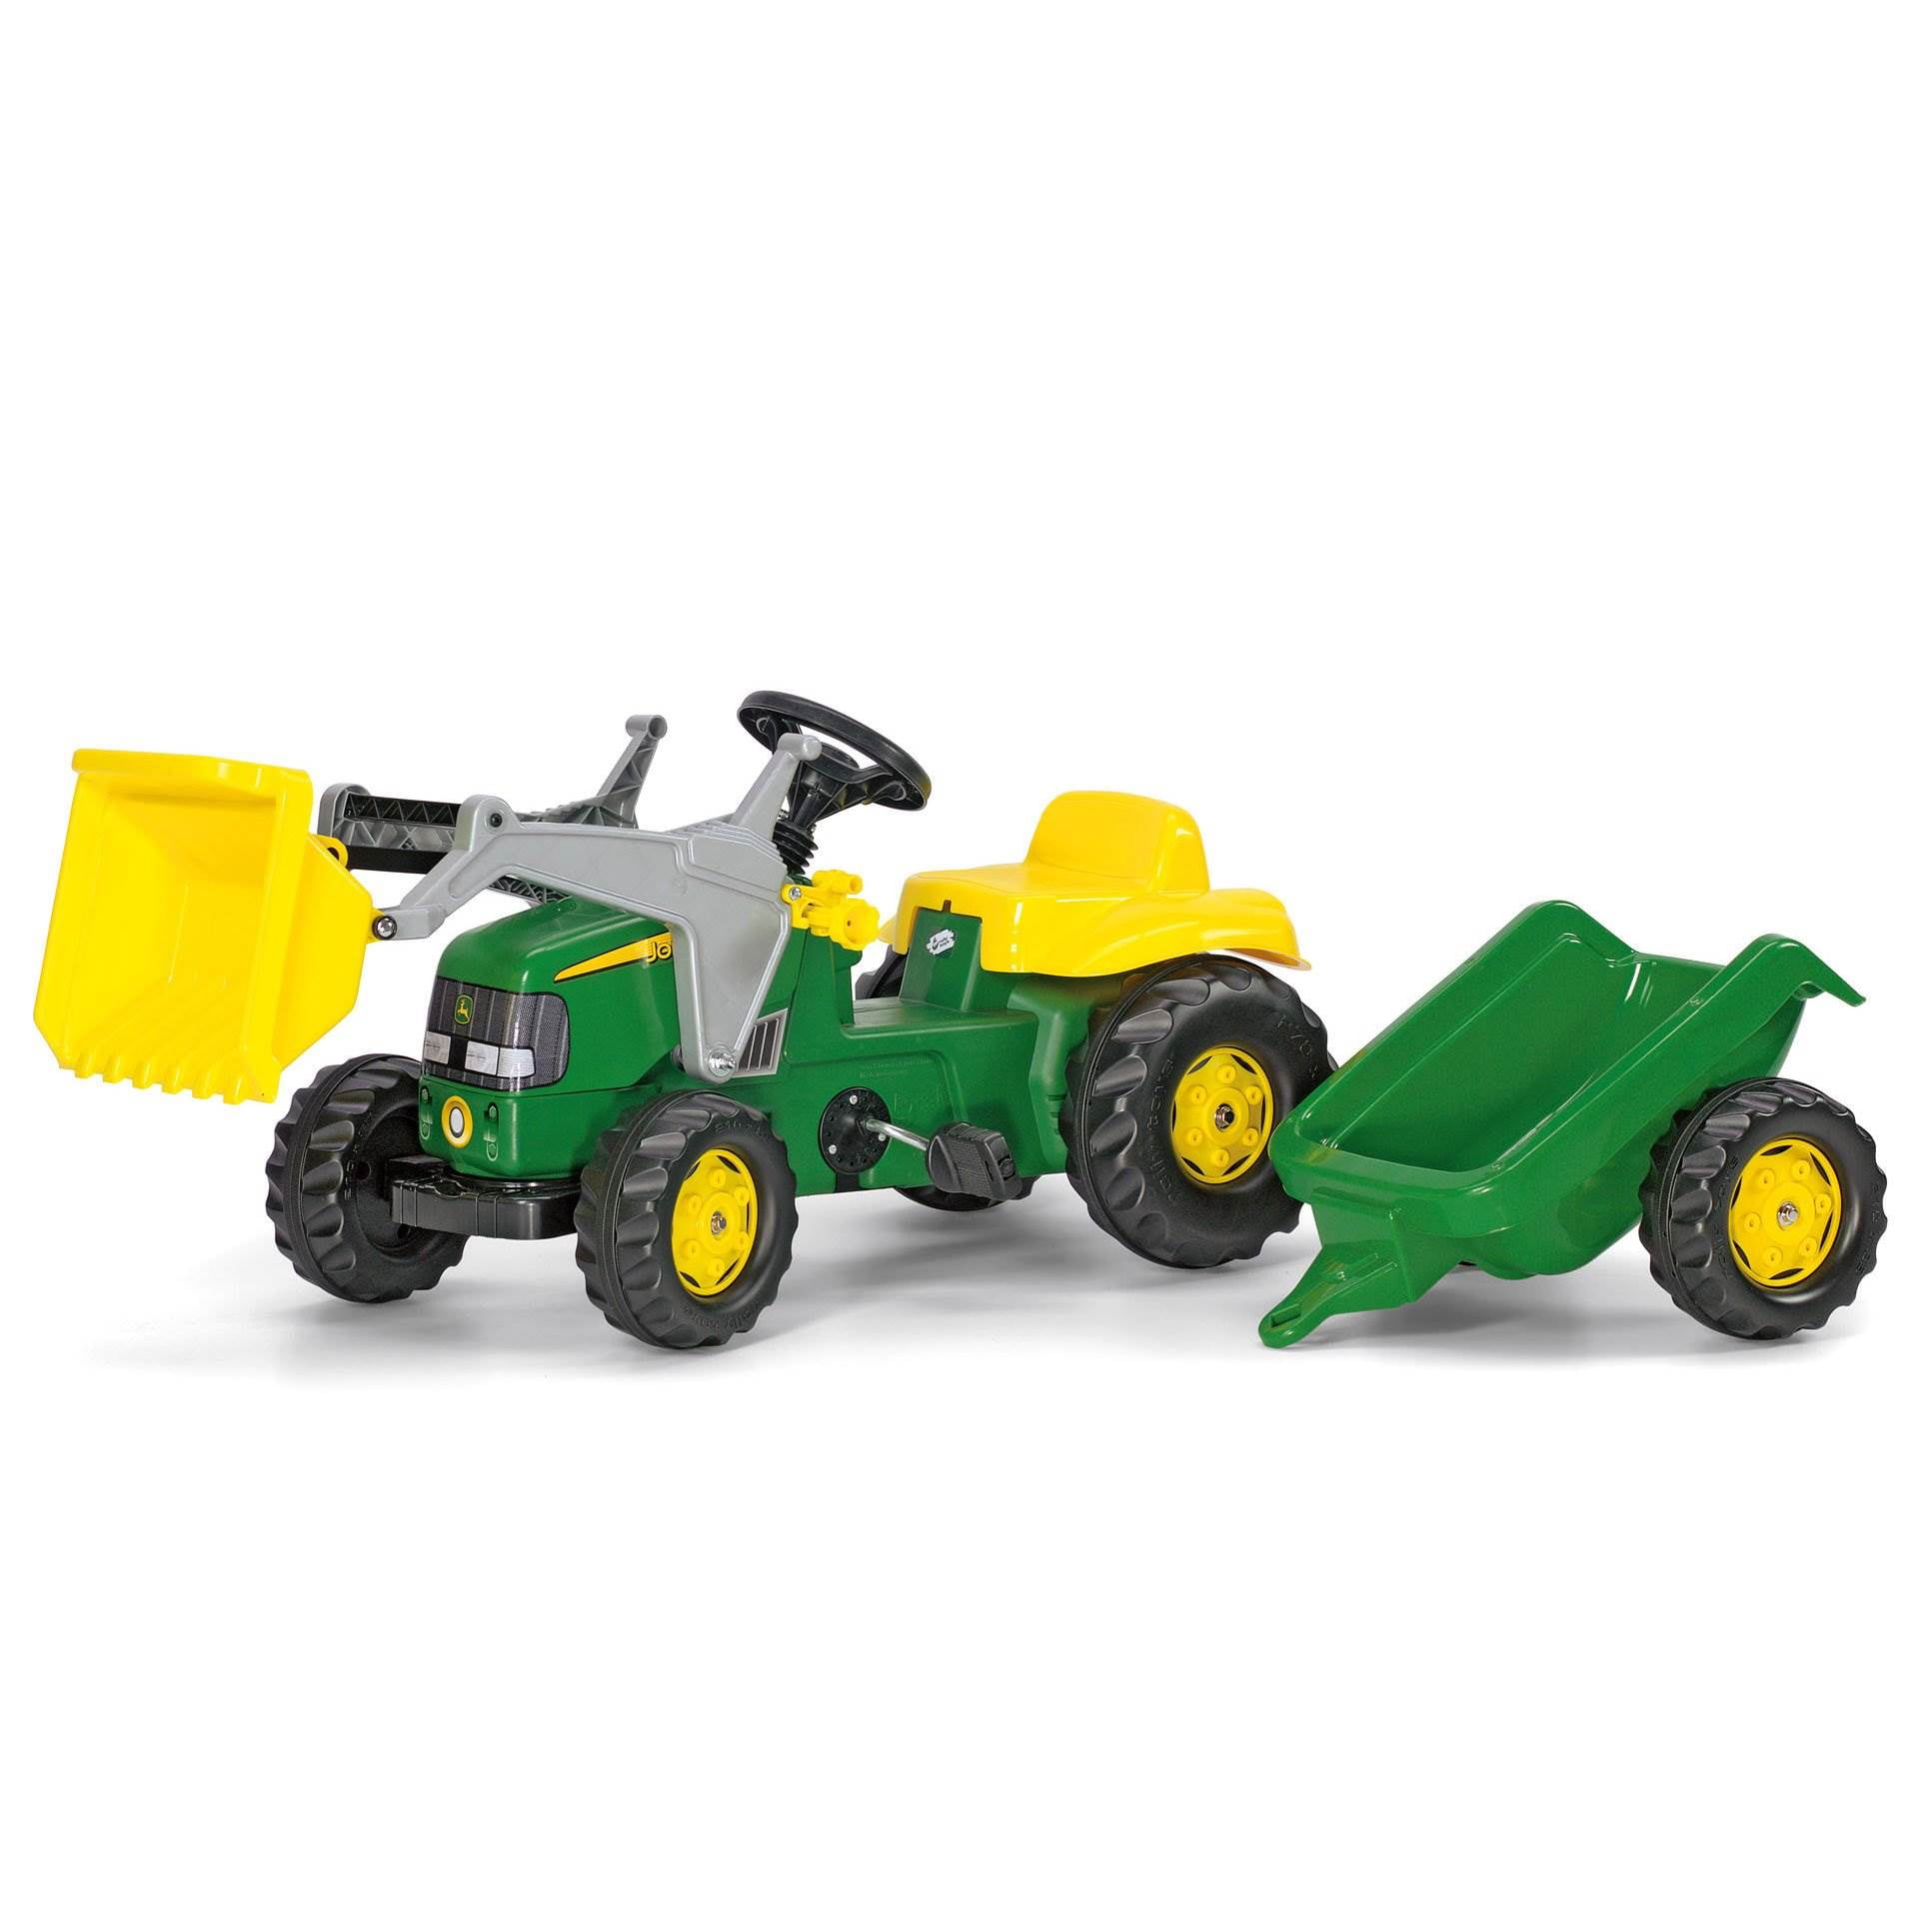 Kettler John Deere Kids Ride-On Toy X-Trac Pedal Tractor with Front Loader 